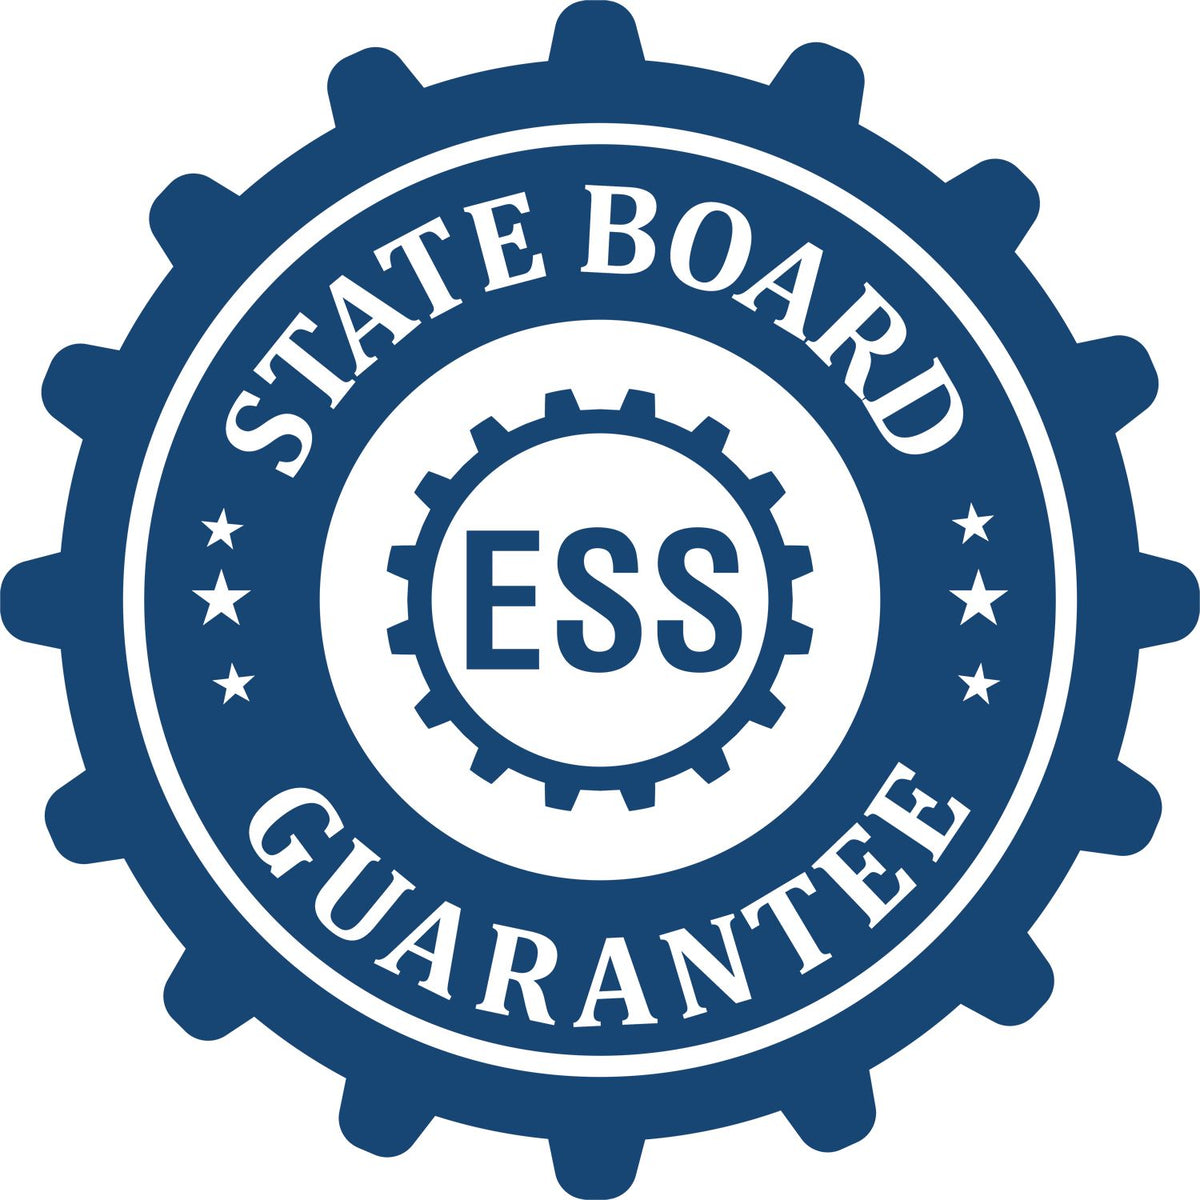 An emblem in a gear shape illustrating a state board guarantee for the Florida Desk Surveyor Seal Embosser product.